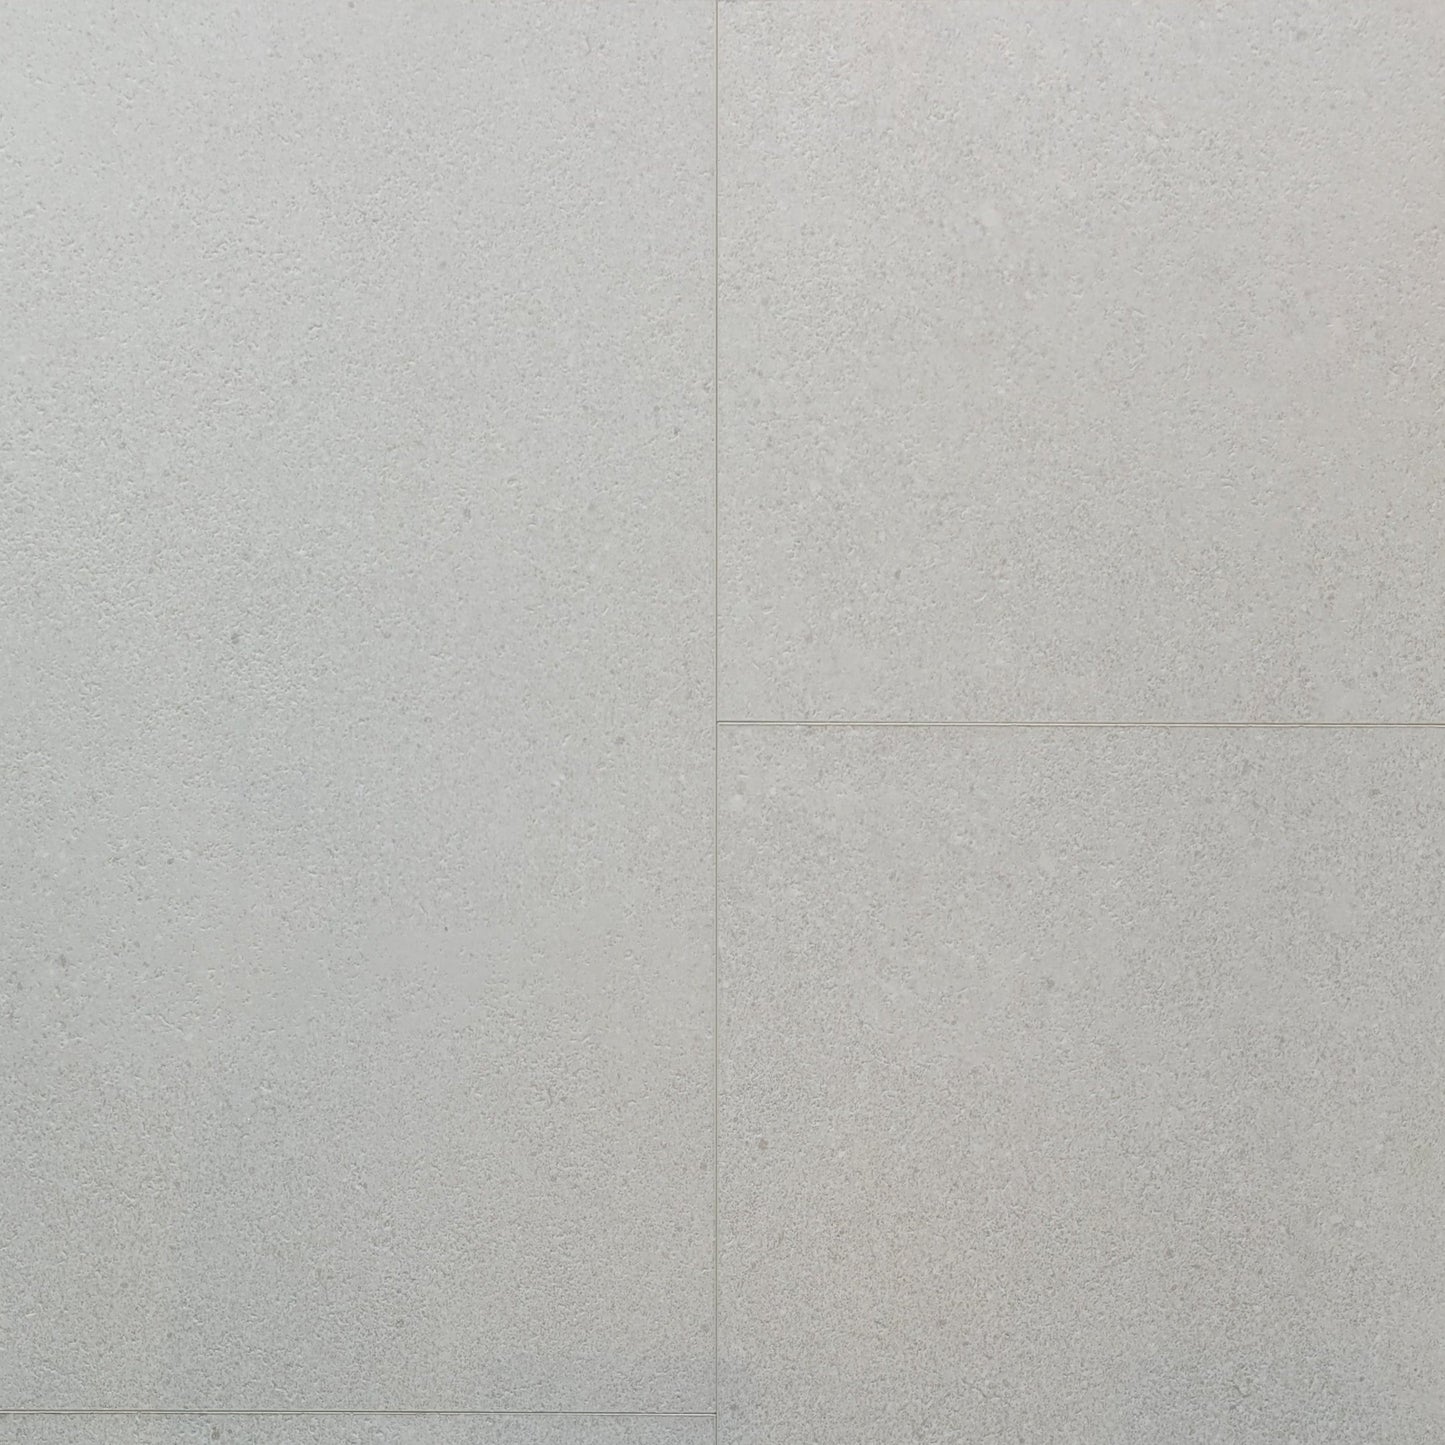 Rosseti Luxury Vinyl Tile (pad attached) $3.99/sf 32.3 sf/box